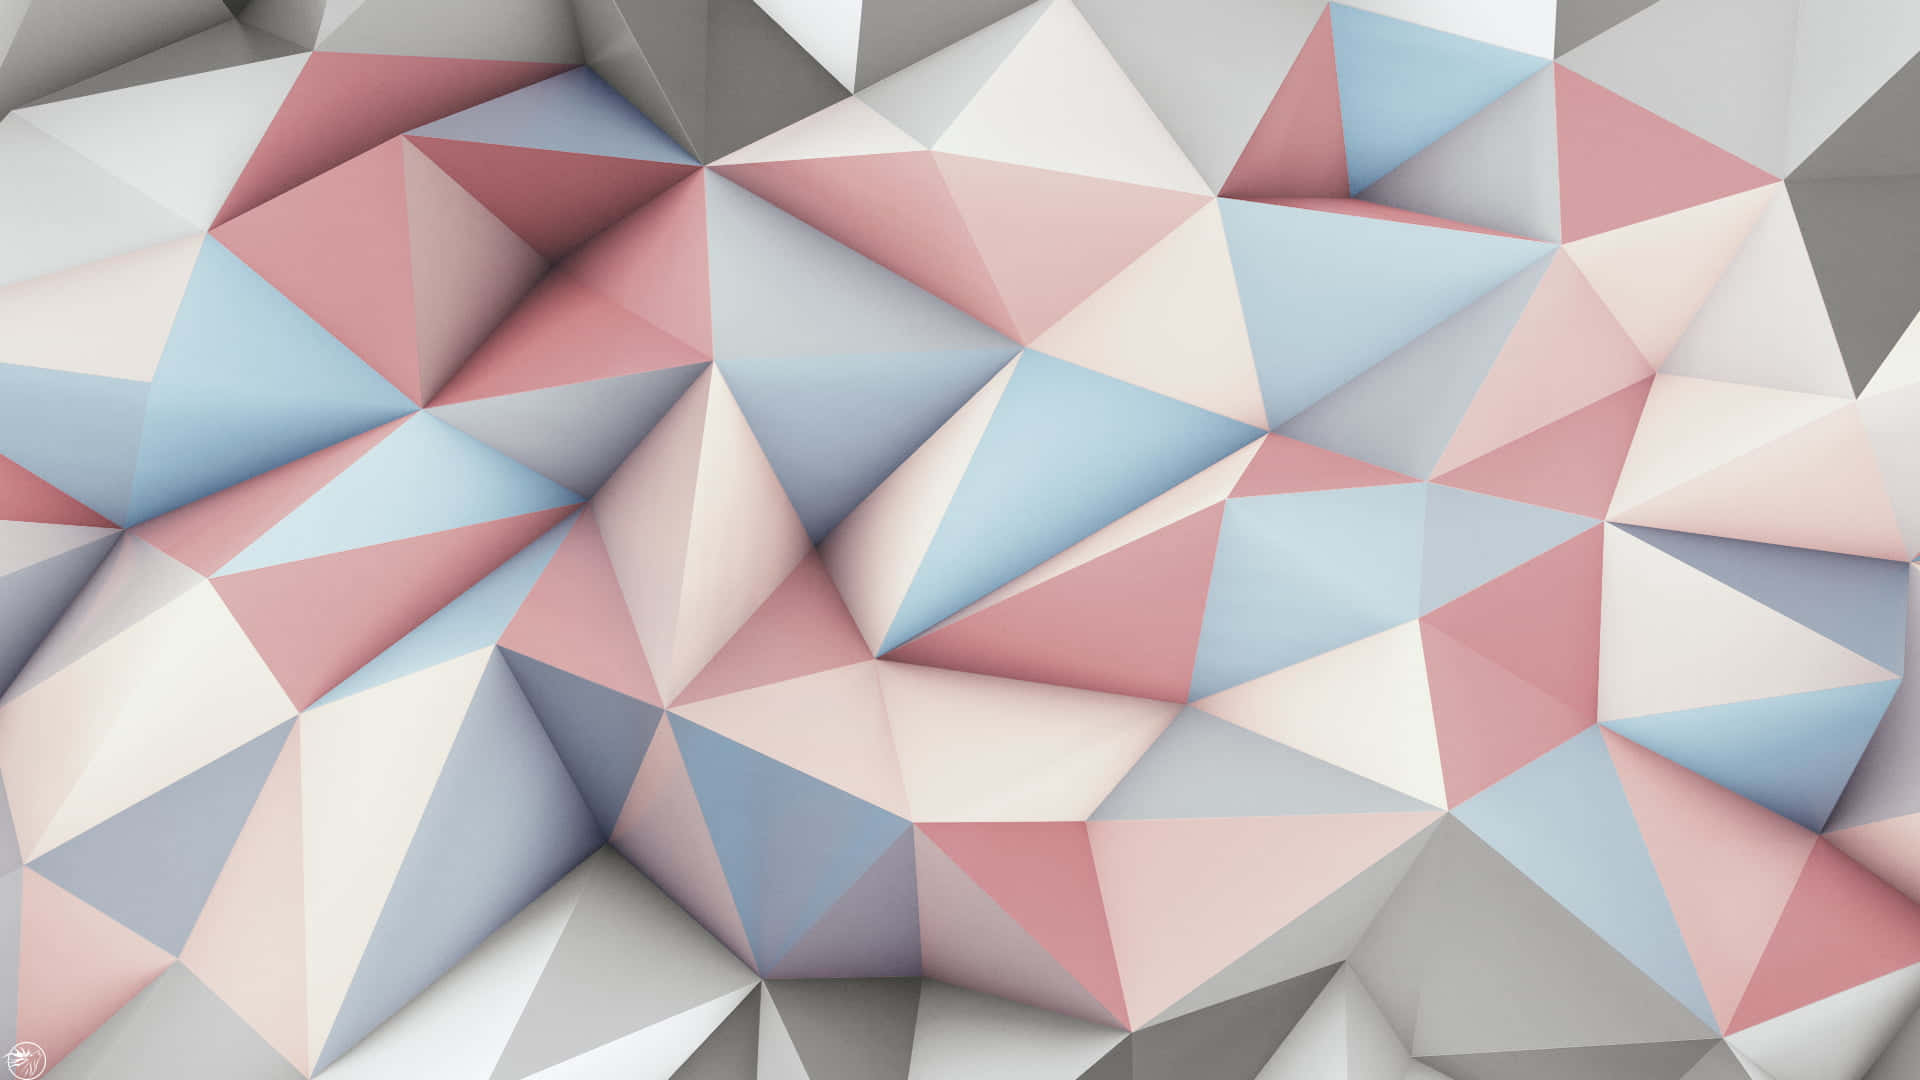 Let your imagination run wild with this minimalistic and abstract Low Poly background